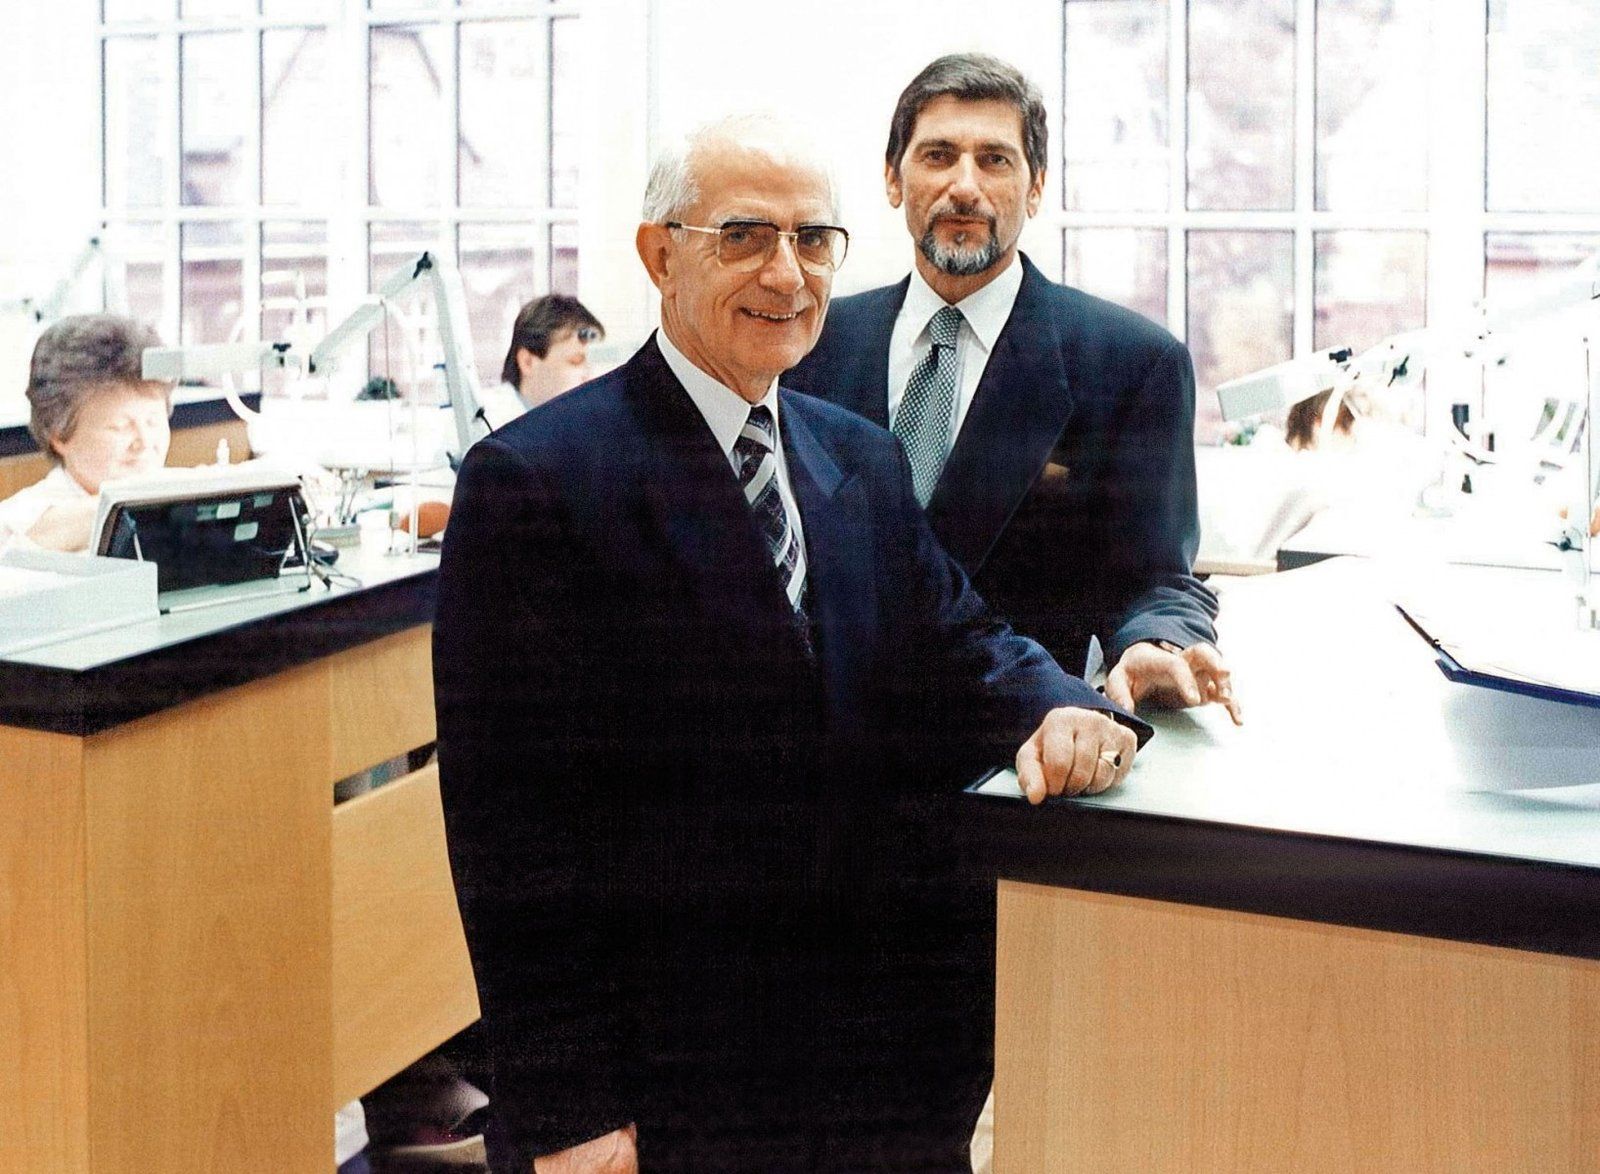 Günter Blümlein and Walter Lange 1994 in the department of watch assembly